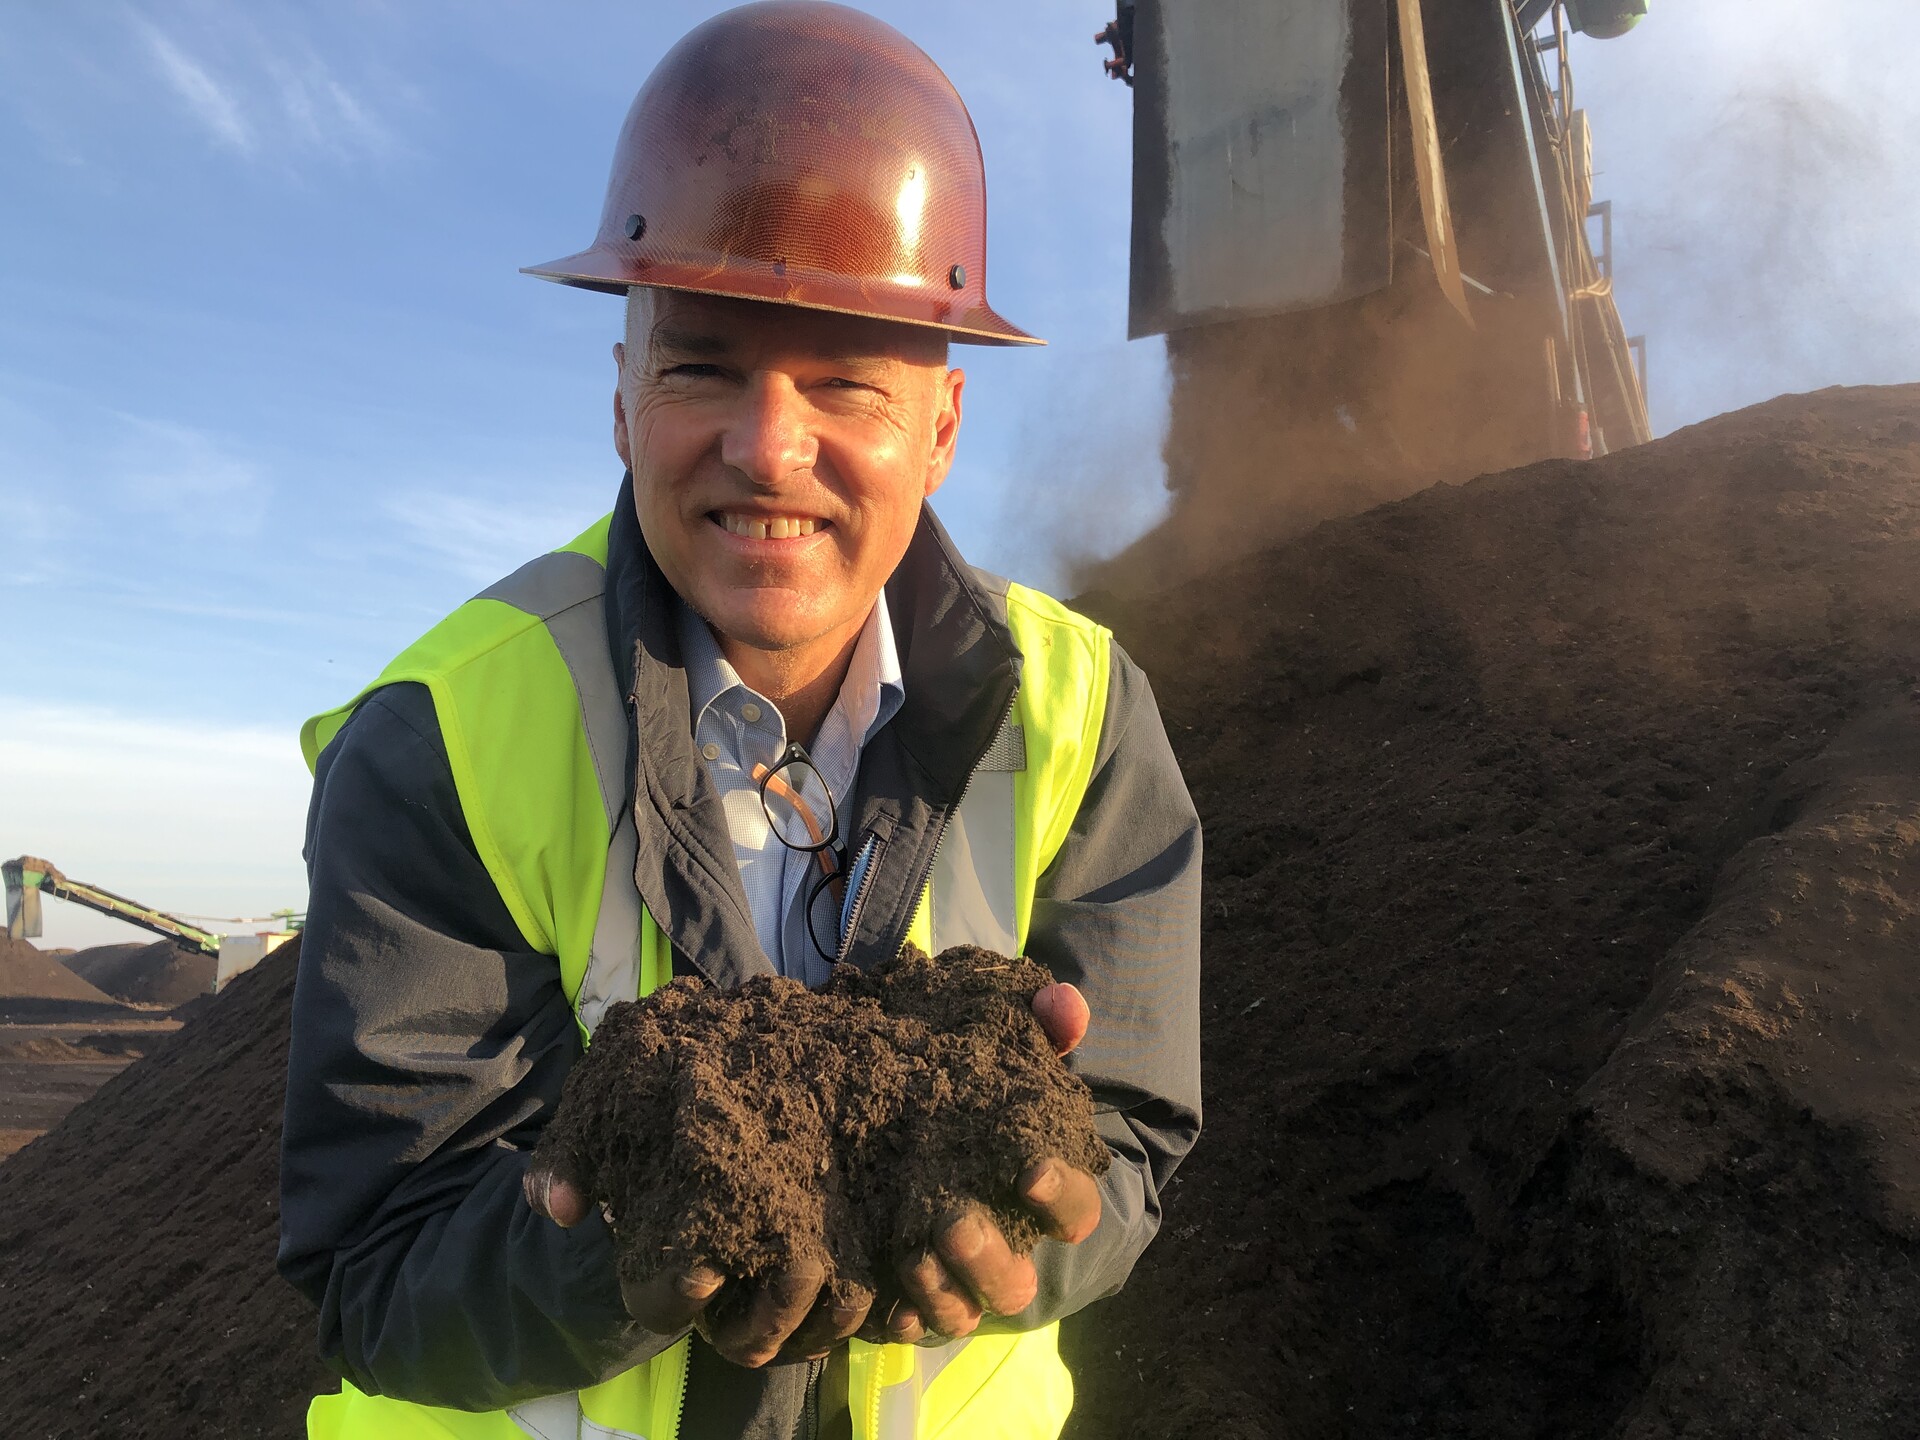 A smiling man with a red hard hat holds a handful of rich, brown compost as a crane dumps more in a large pile behind him.